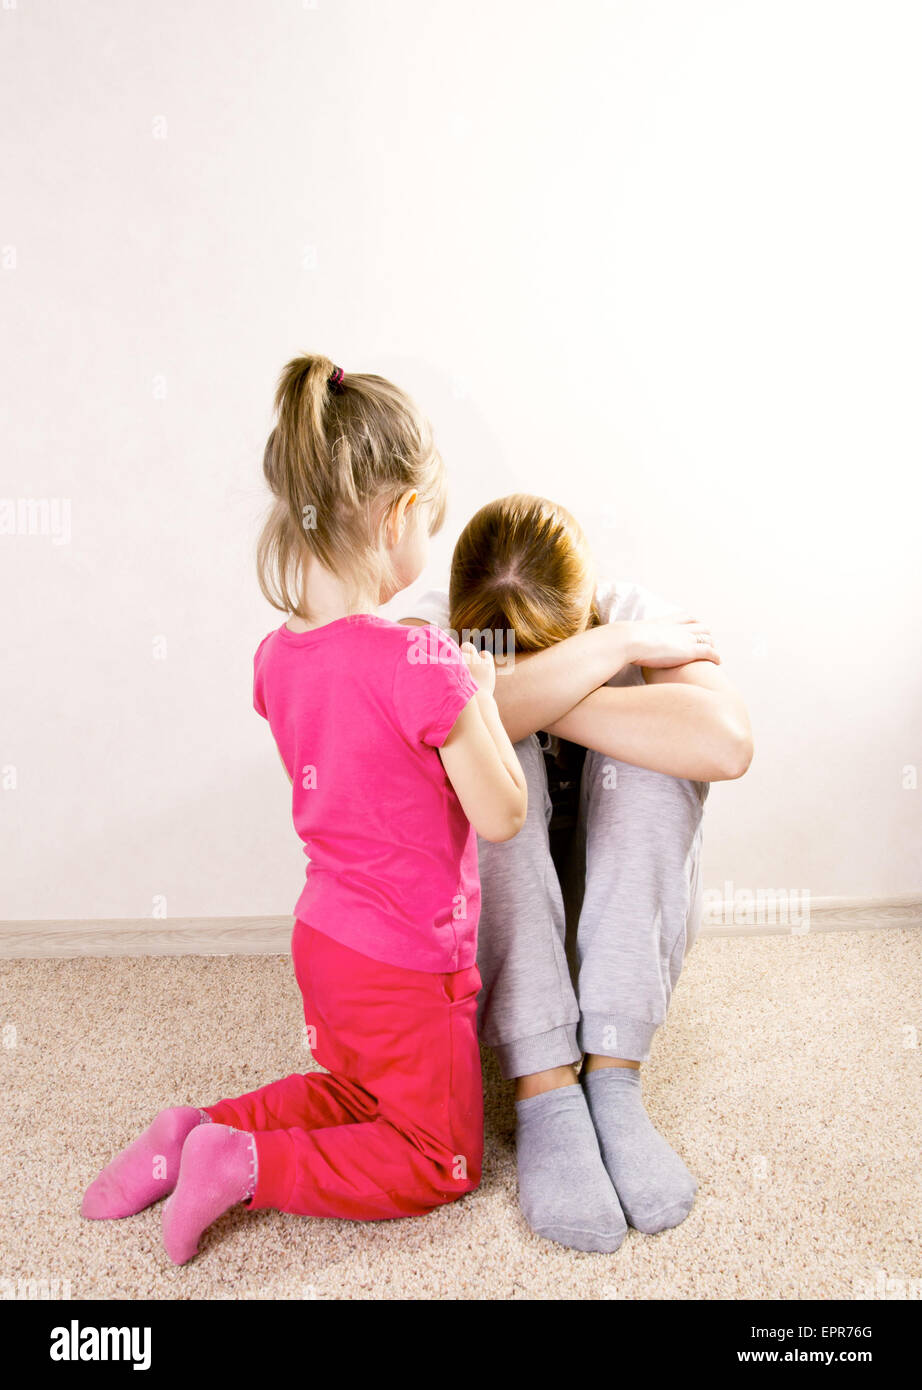 Violence in a family. The child and mother. Stock Photo